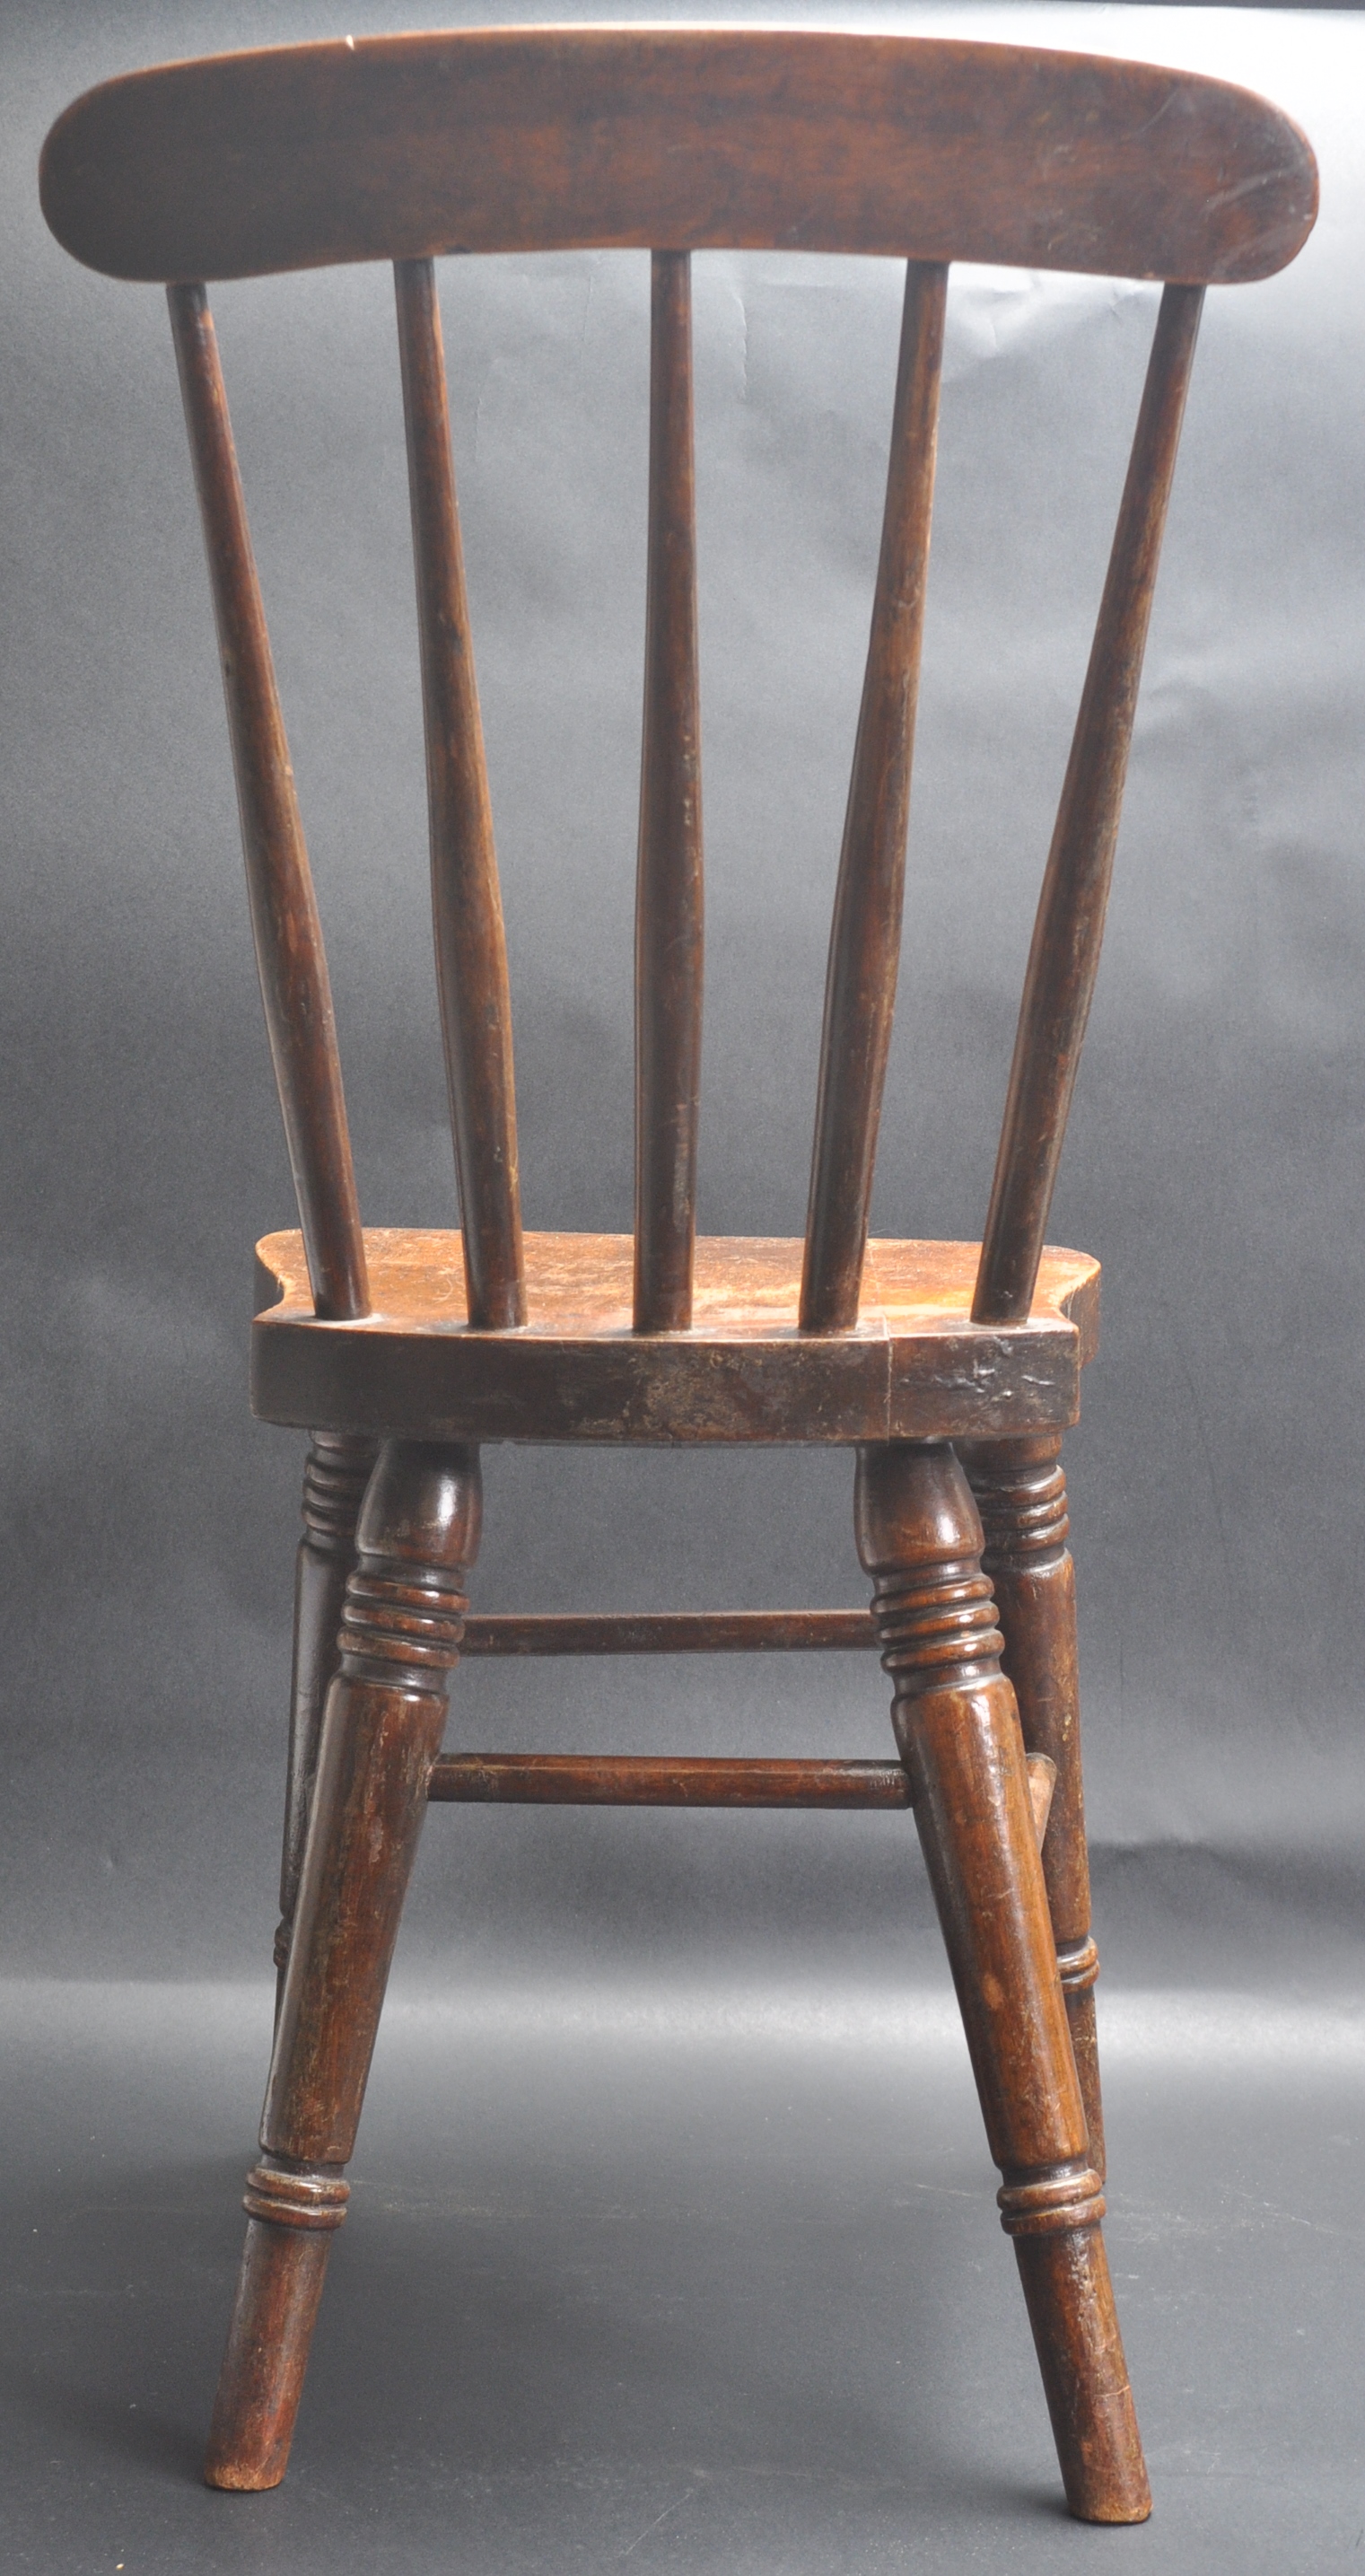 EARLY 20TH CENTURY BEECH AND ELM WINDSOR CHAIR - Image 3 of 4